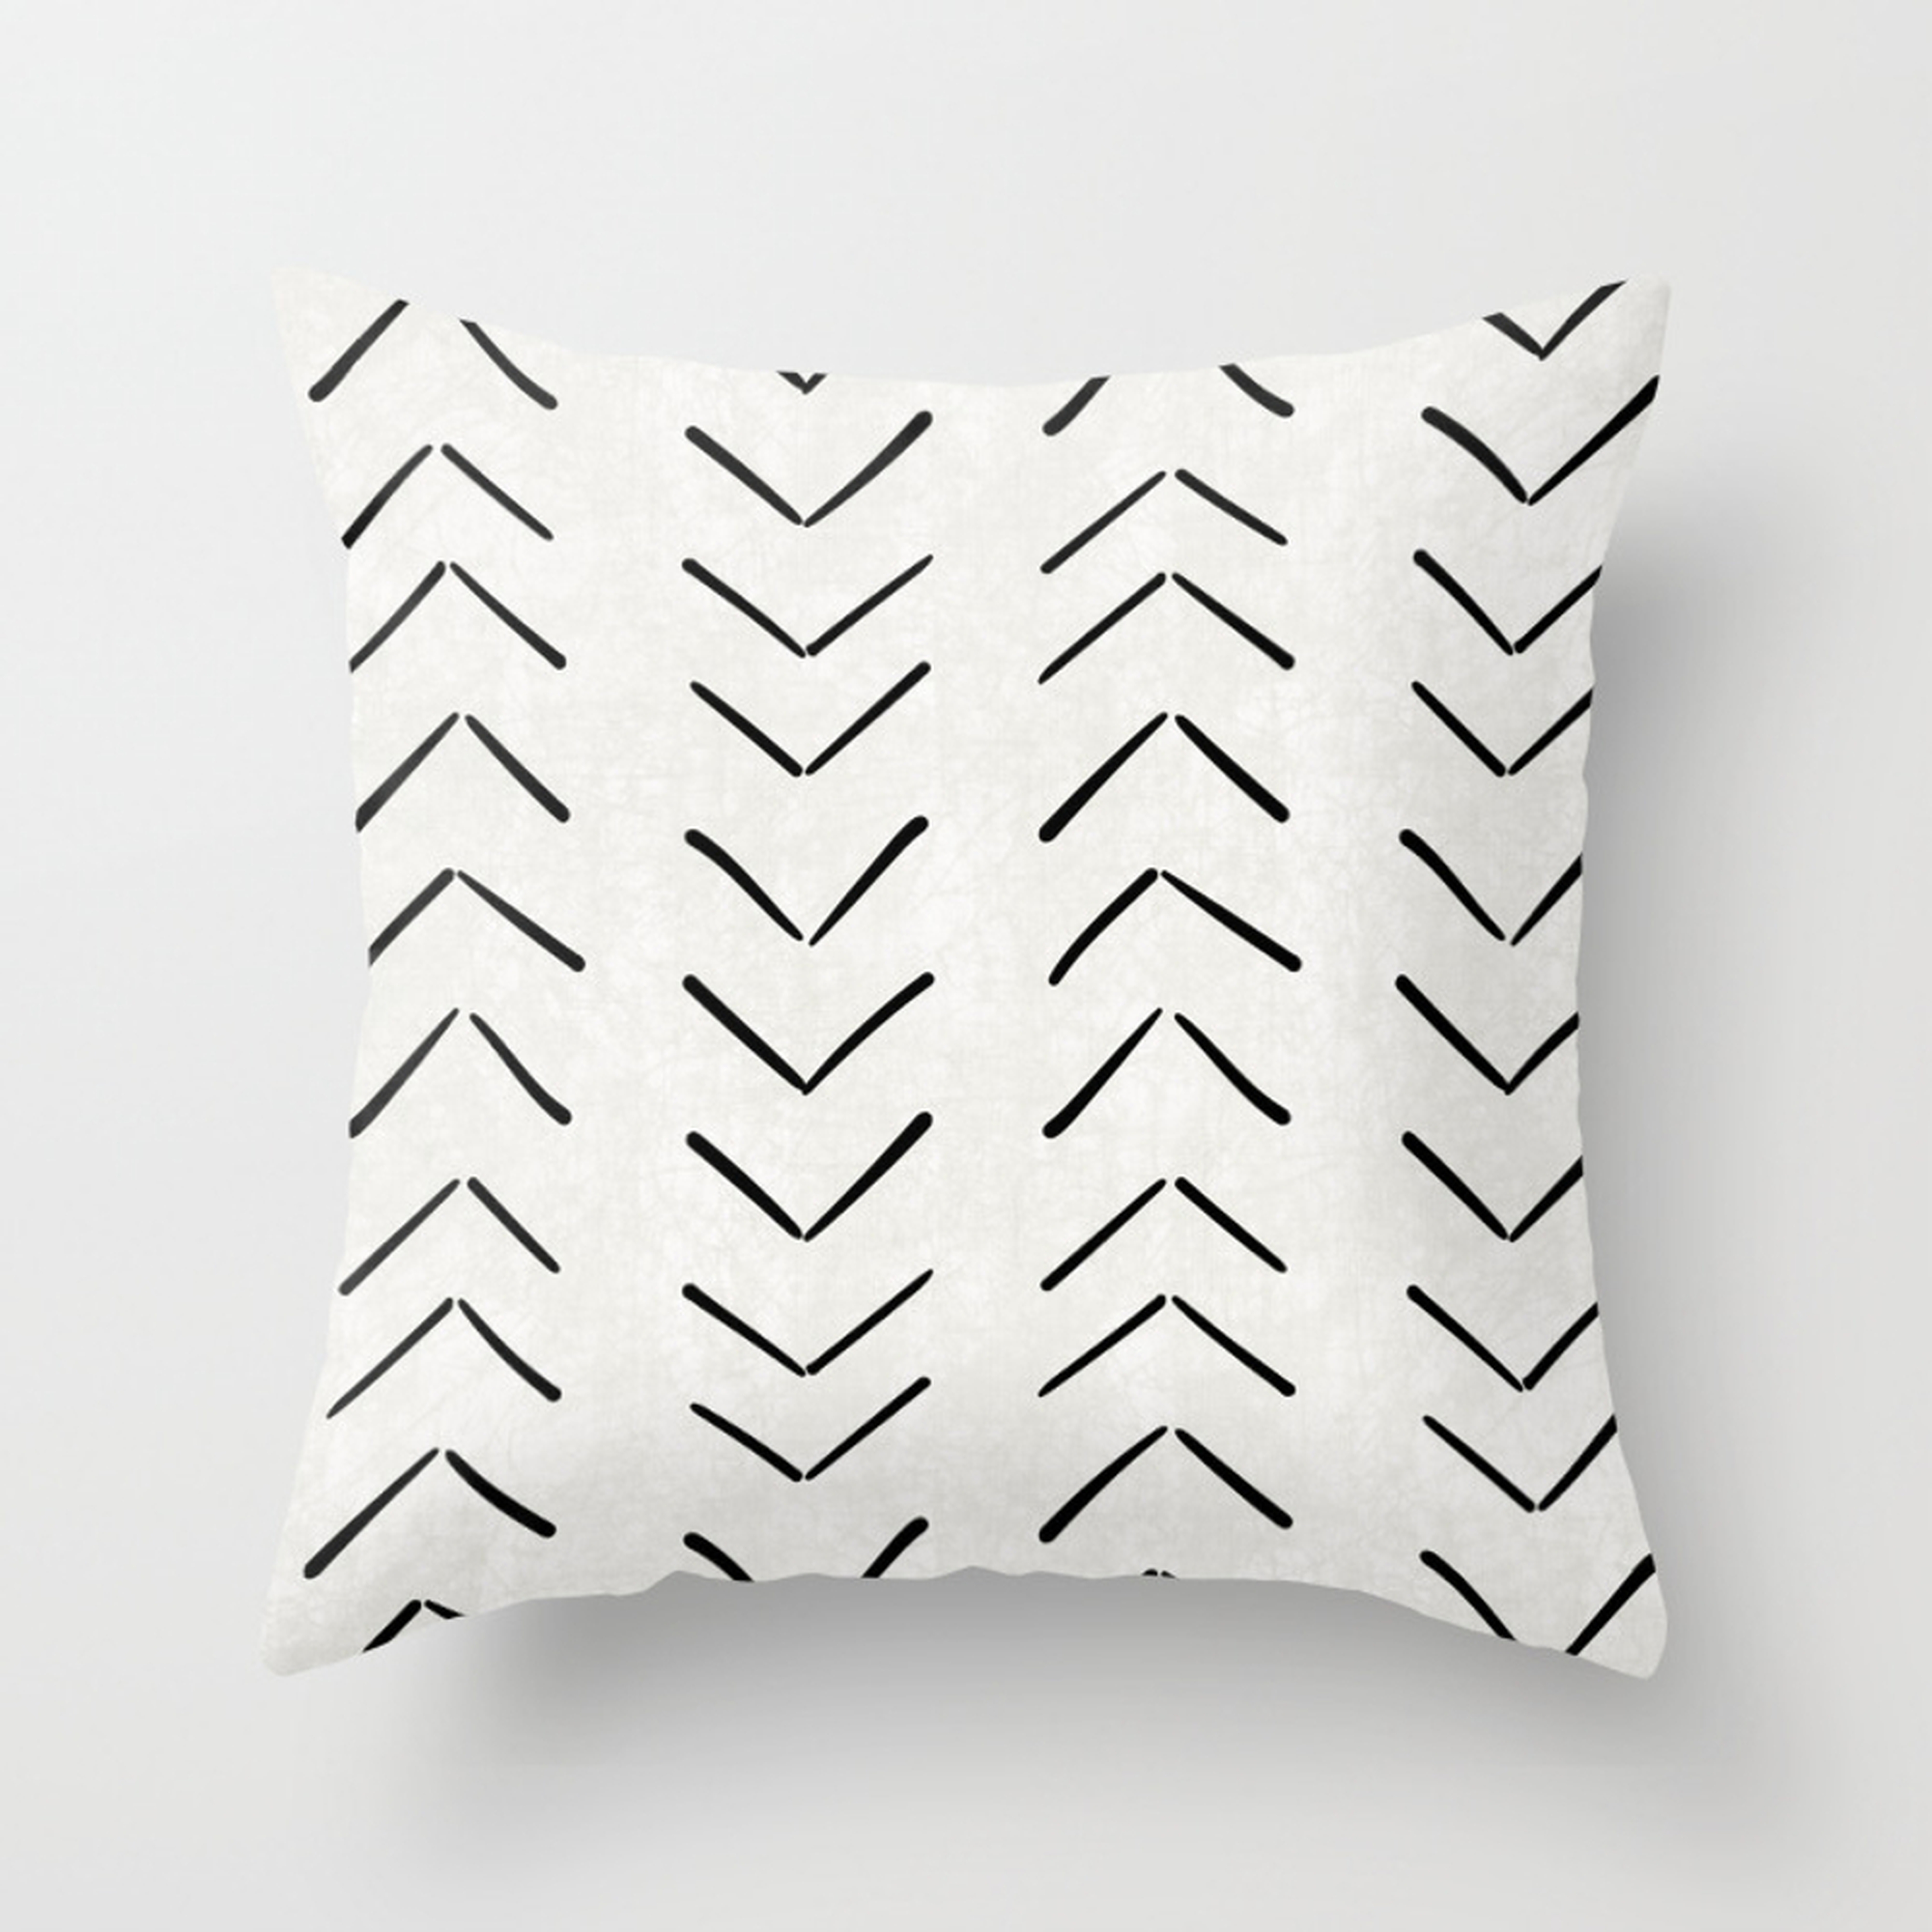 Mud Cloth Big Arrows in Cream - Indoor Cover (16" x 16") with pillow insert by Beckybailey1 - Society6